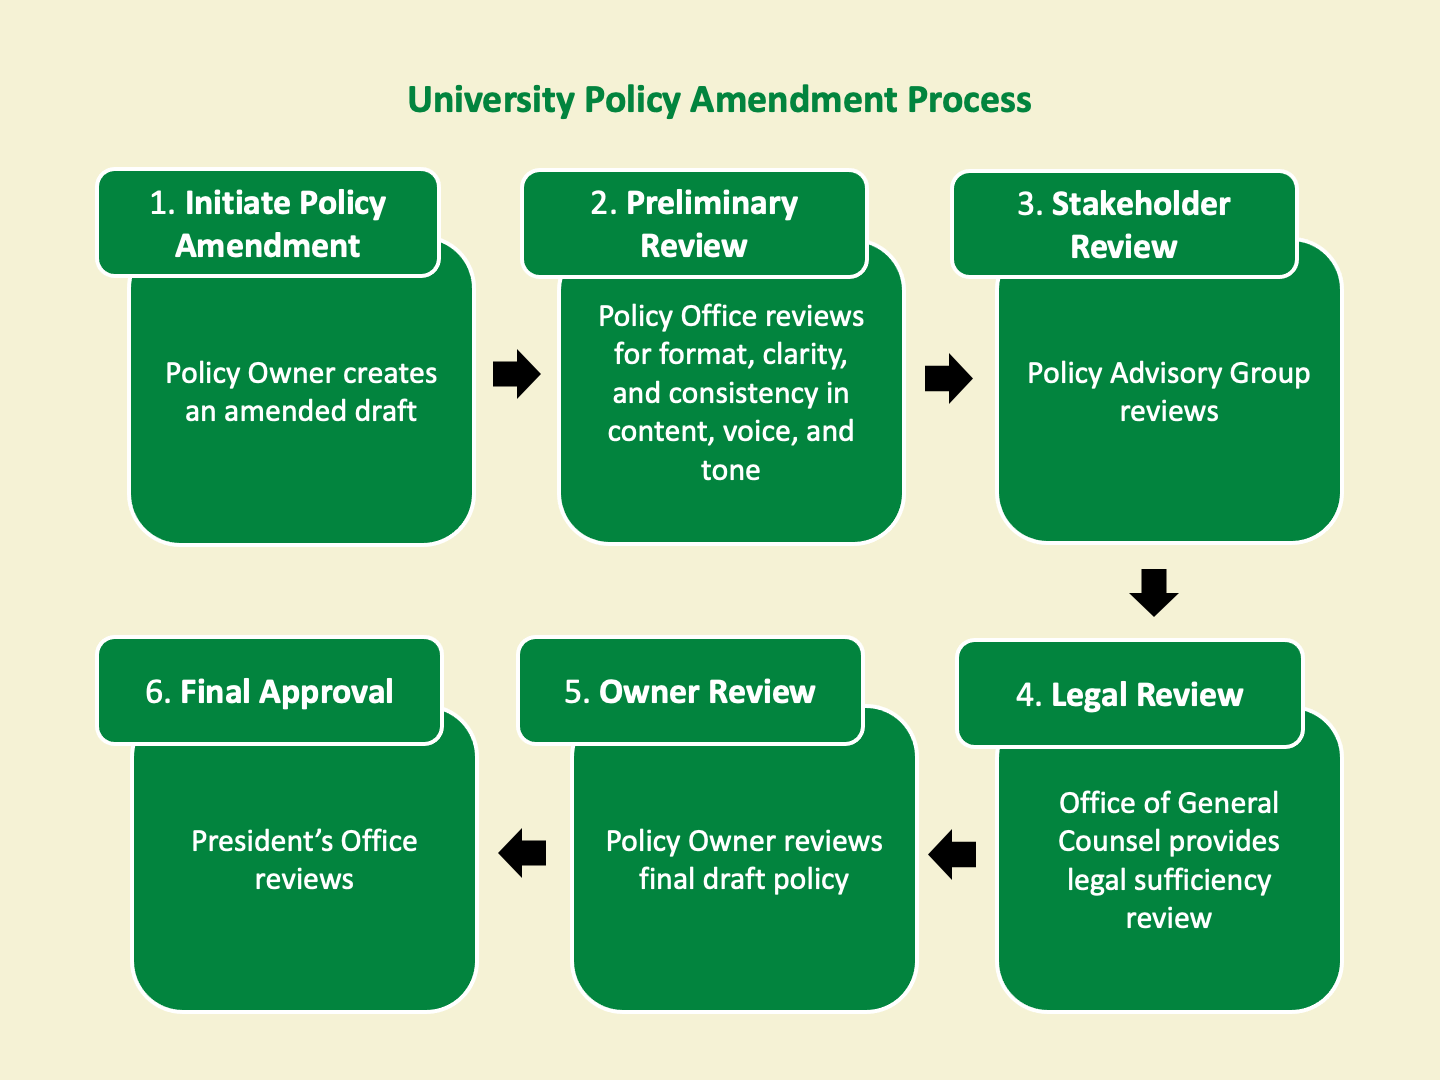 Flow chart displaying the 6 major steps for the policy amendment process, including: 1. Policy Owner initiates a draft with the Policy Office, 2. Policy Office reviewing draft for formatting consistency, 3. Policy Advisory Group review, 4. Office of General Counsel Review, 5. Policy Owner review, and 6. Office of President review.